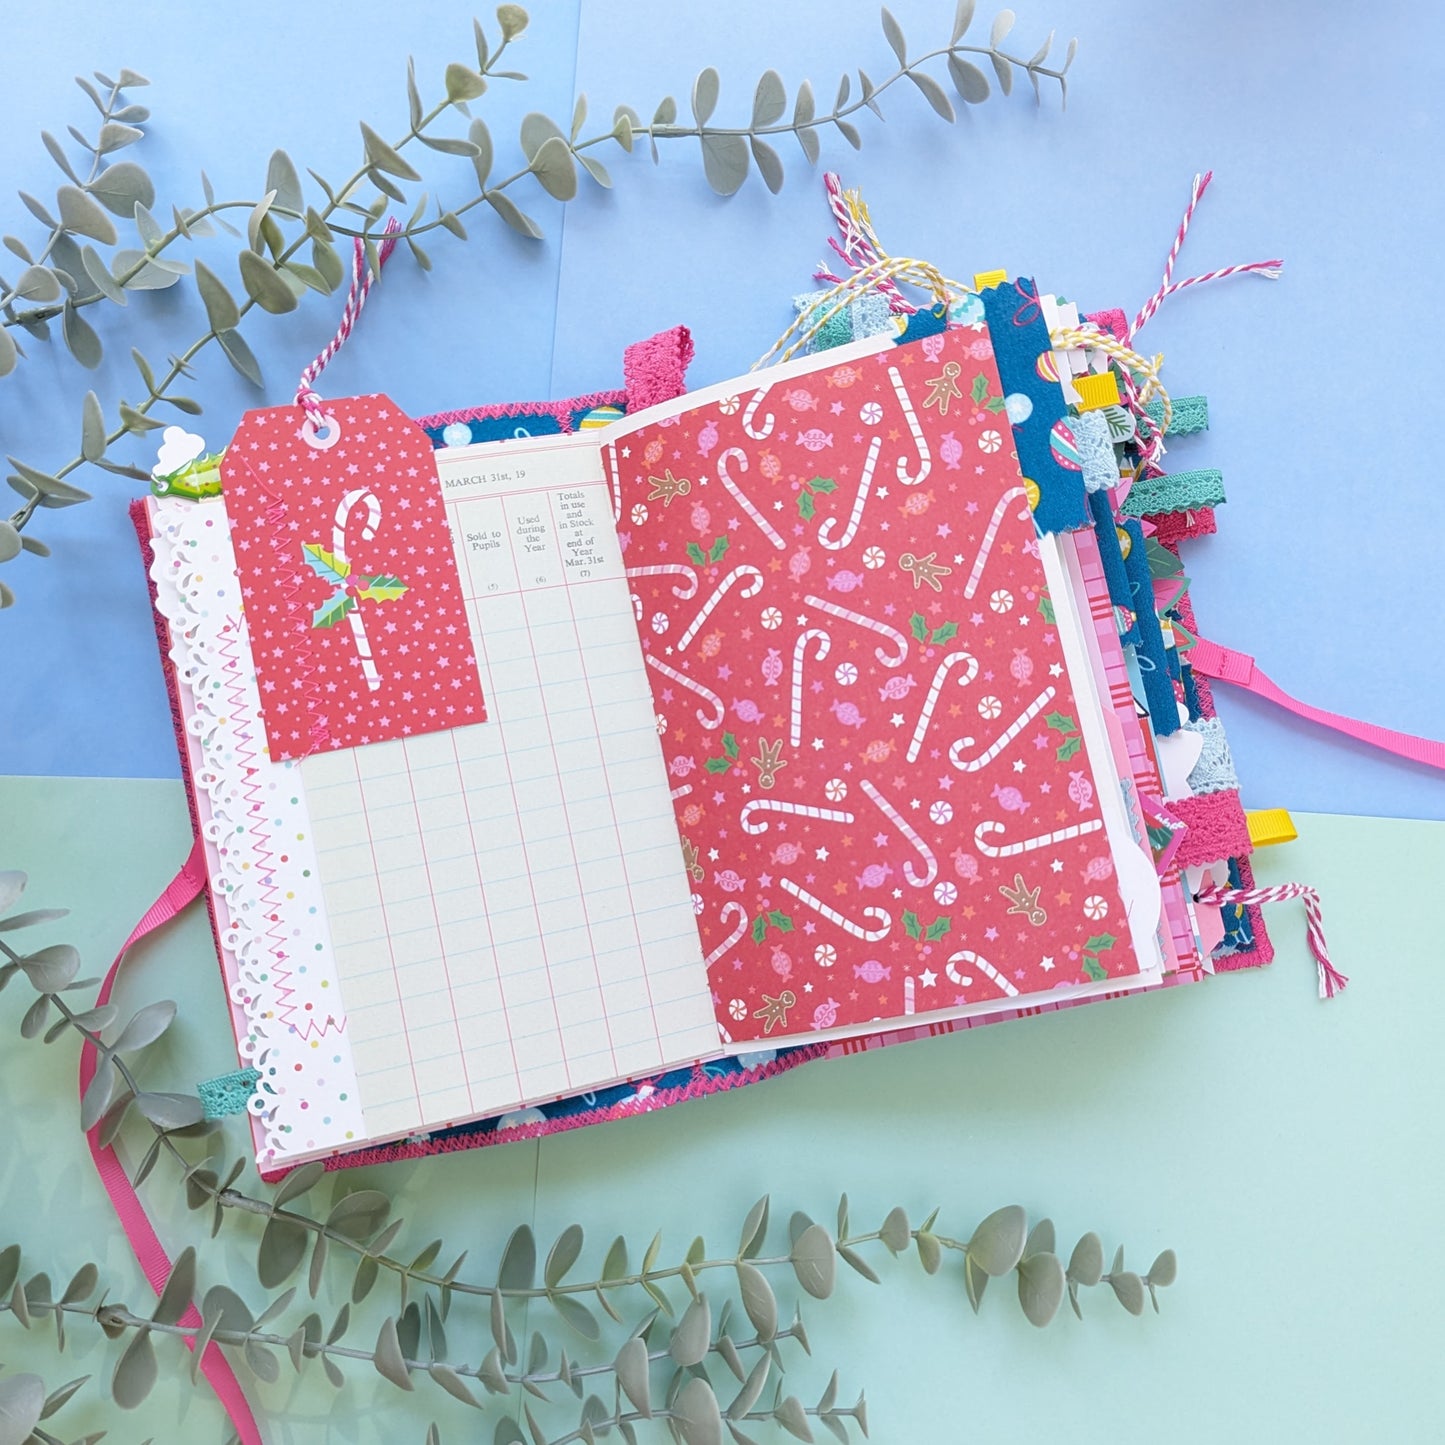 Handmade Liberty Festive Baubles Fabric Cover Journal - Pink